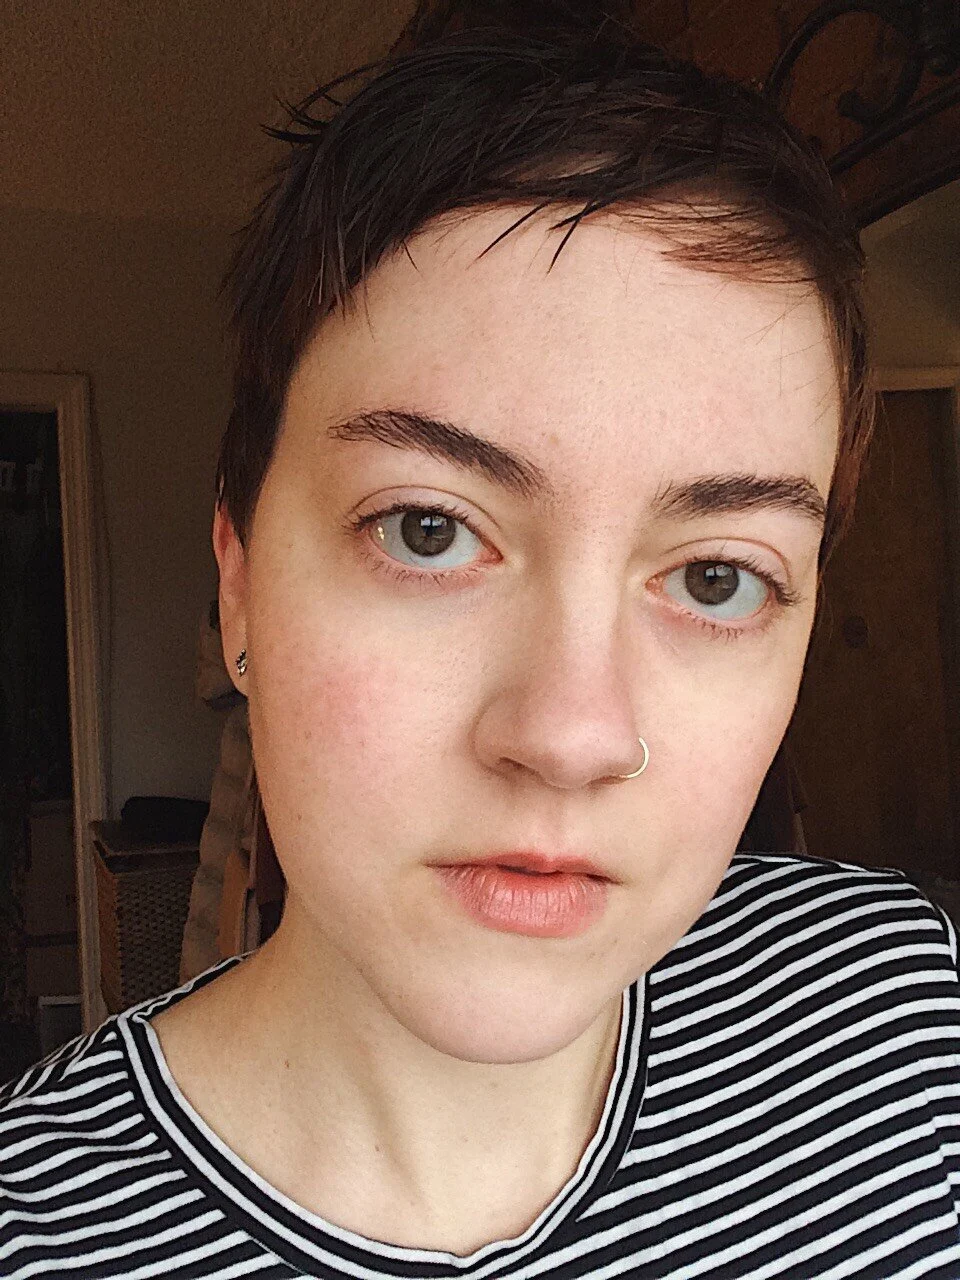  A typical daily makeup look, with Glossier Boy Brow and Haloscope, plus  The Body Shop Powder Foundation , Physician’s Formula Blush, and  Clinique Black Honey  Lip color 